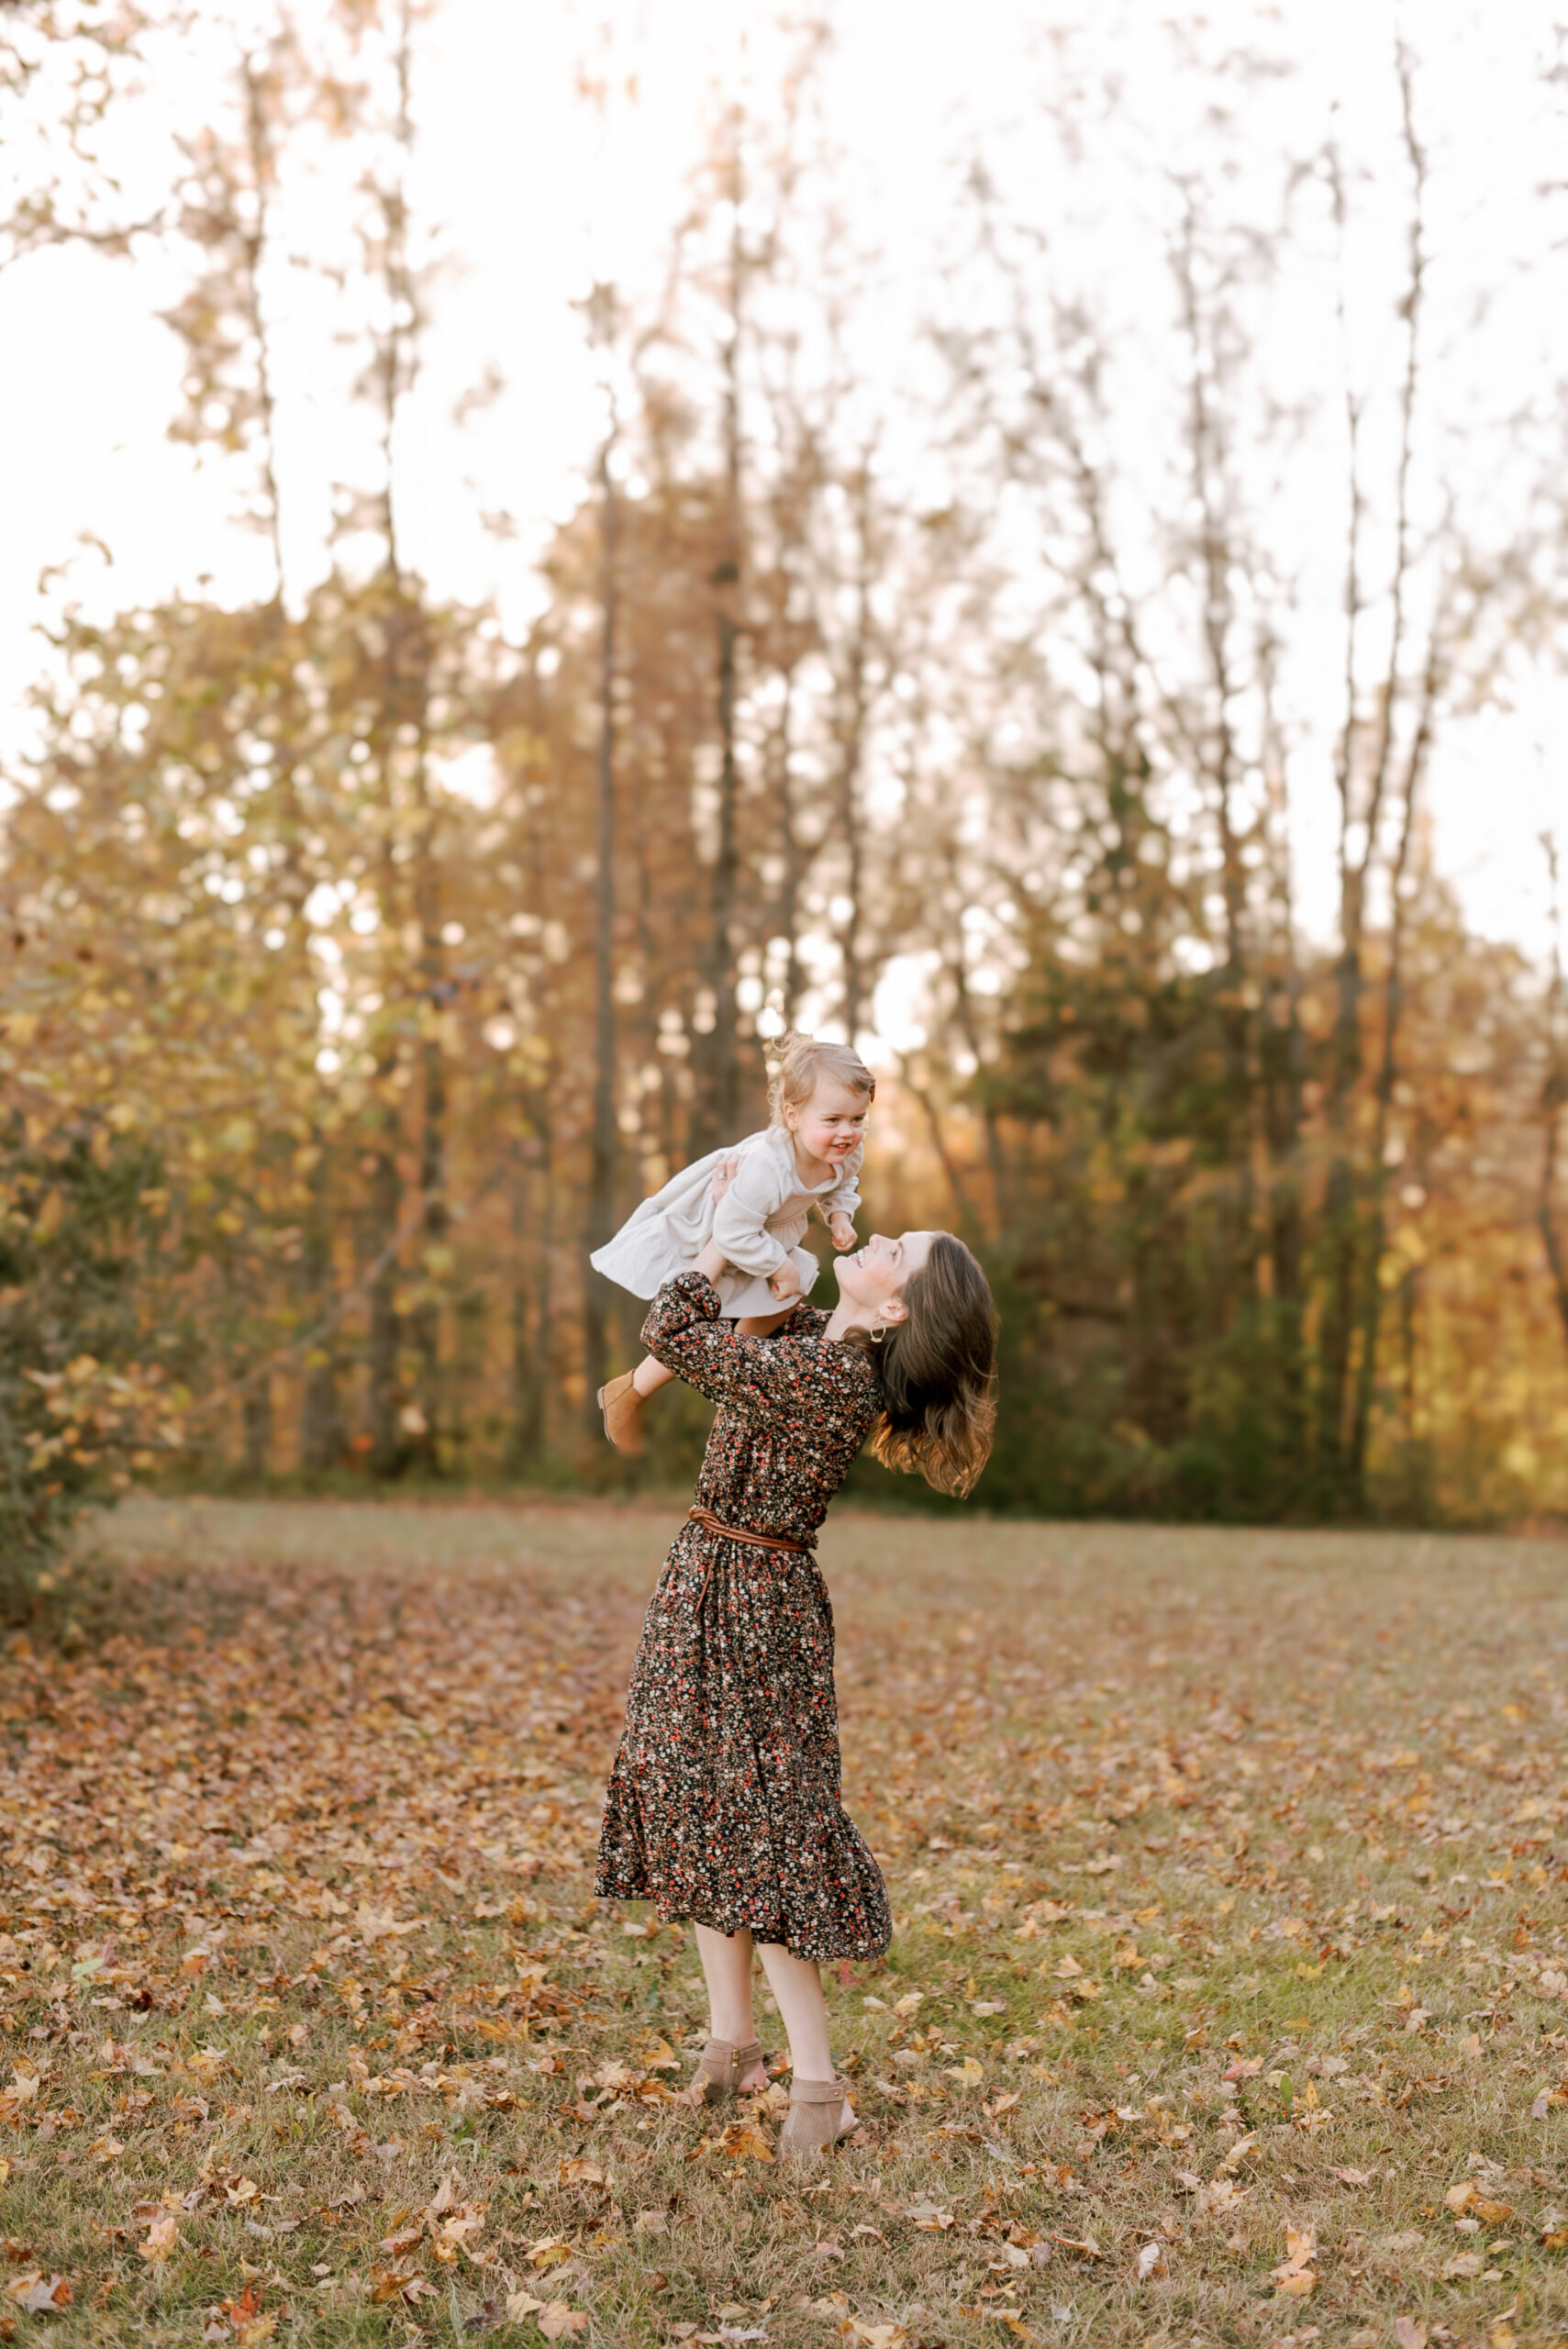 Mom plays with baby in the leaves at Horseshoe Farm Nature Preserve during their fall family portrait session. Image by Raleigh family photographer A.J. Dunlap Photography.